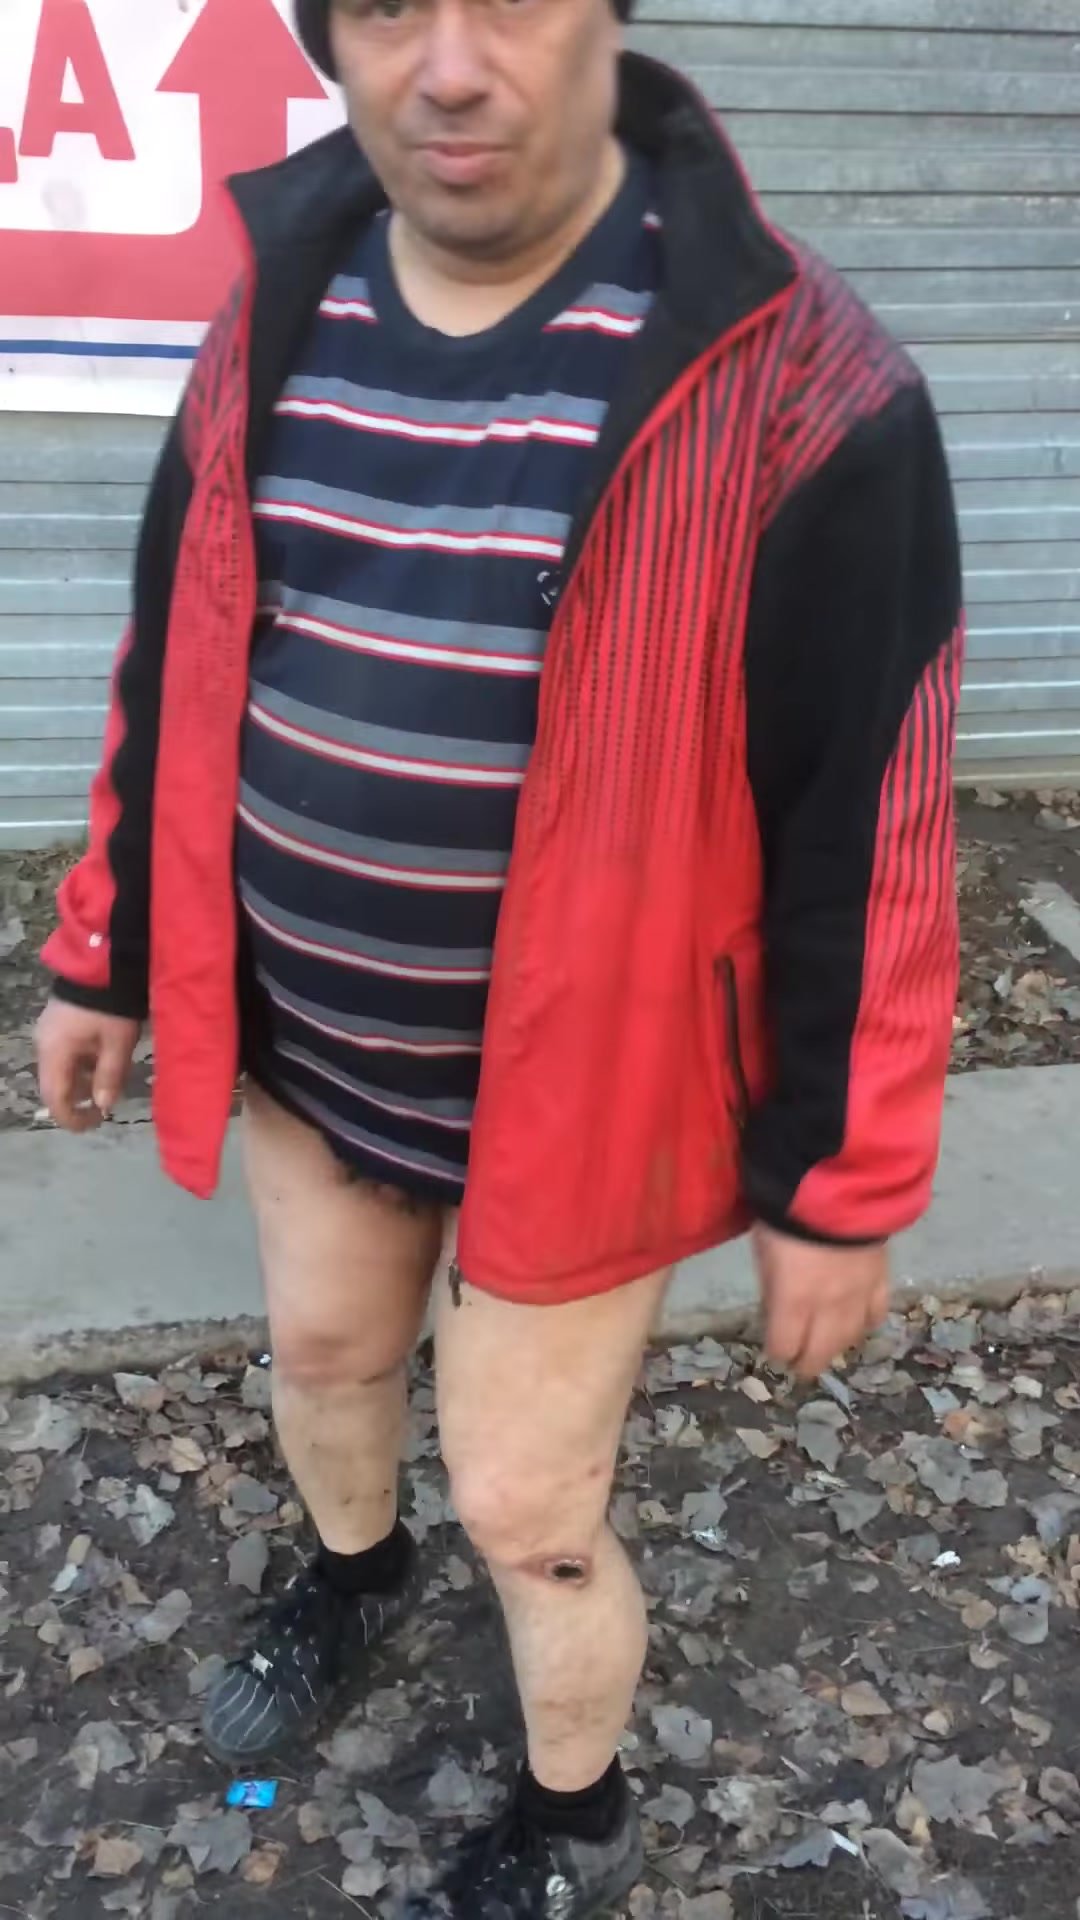 Russian guy without pants on the street